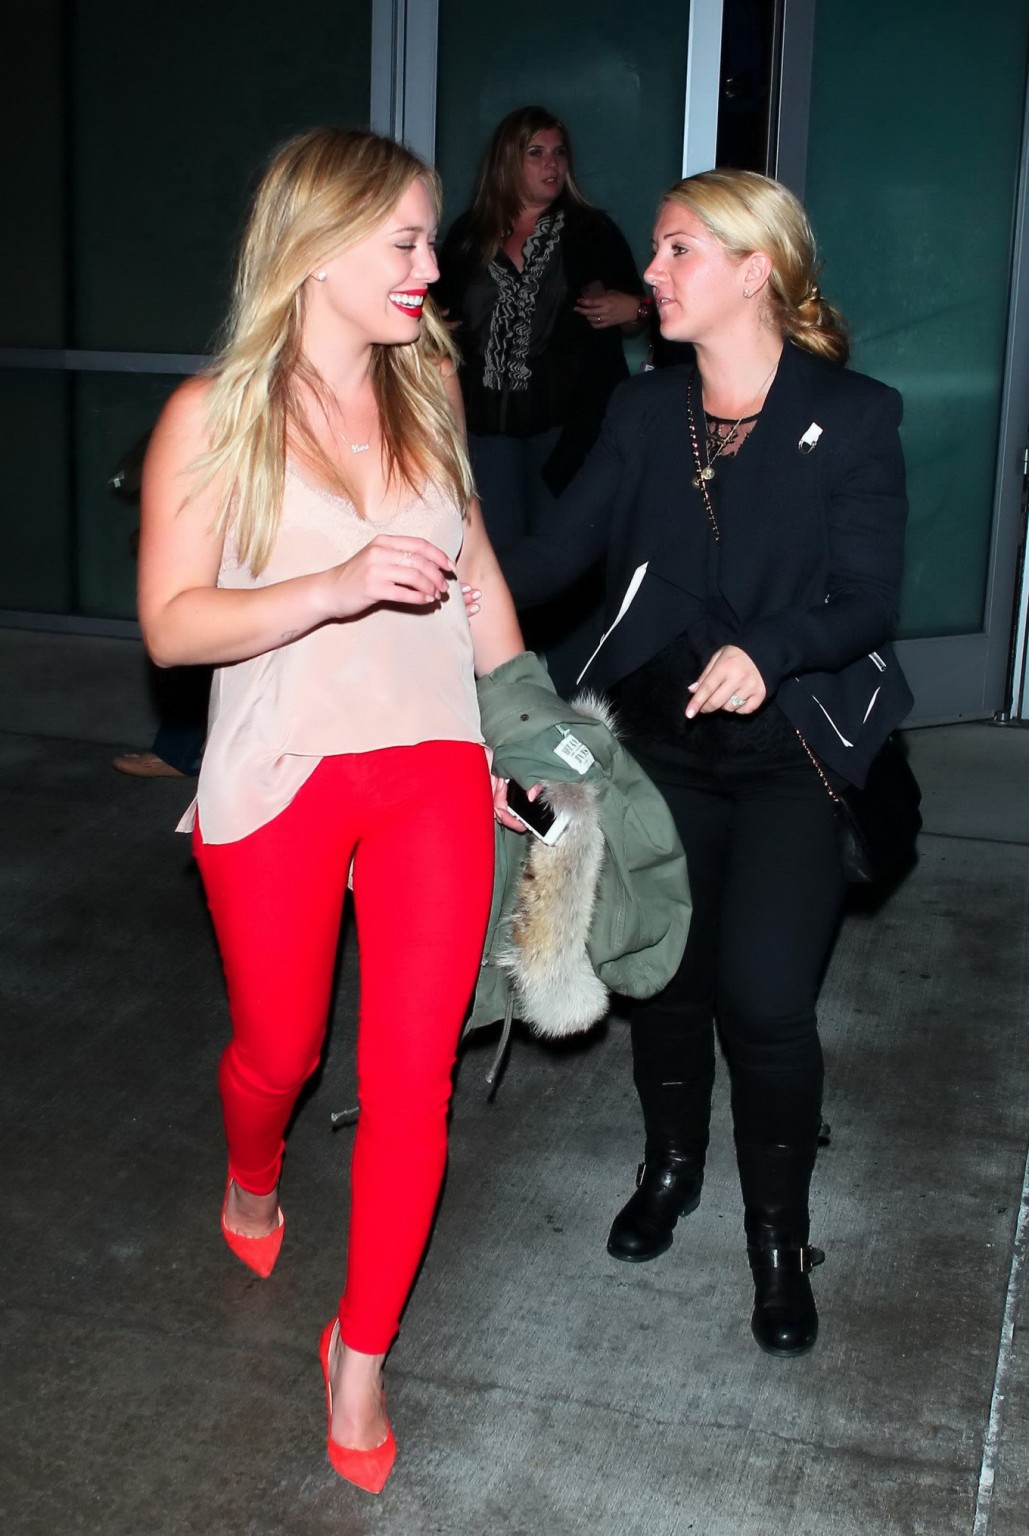 Hilary Duff wearing tank top and red tights leaving Pink concert at the Staples  #75215893